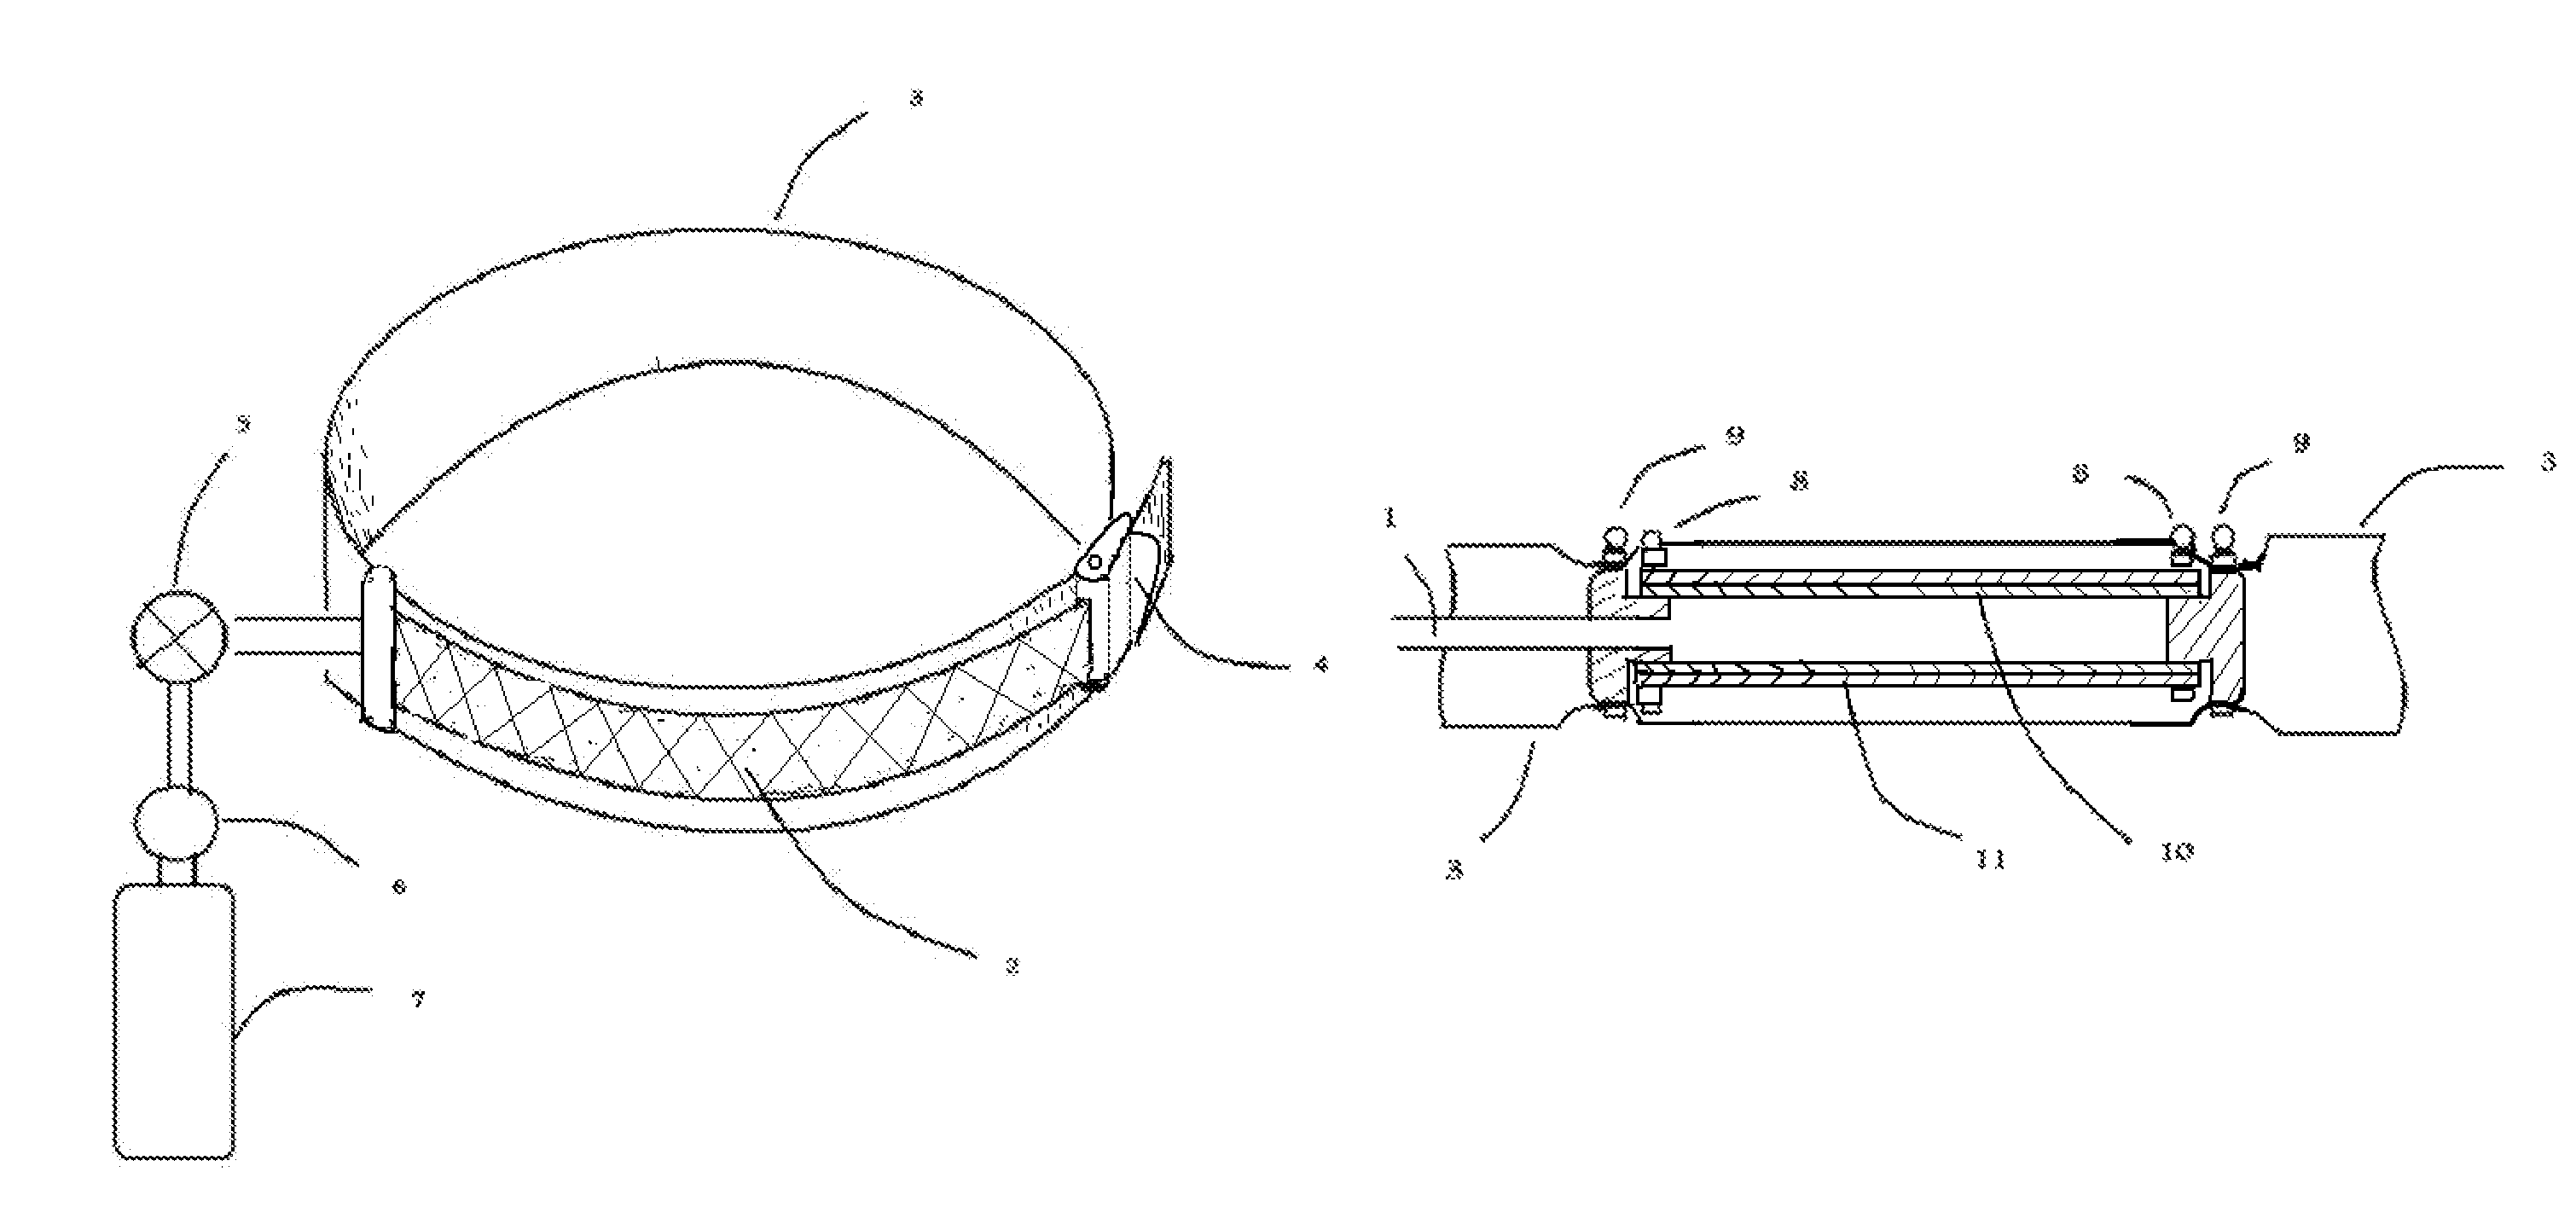 Body surface compression with pneumatic shortening element